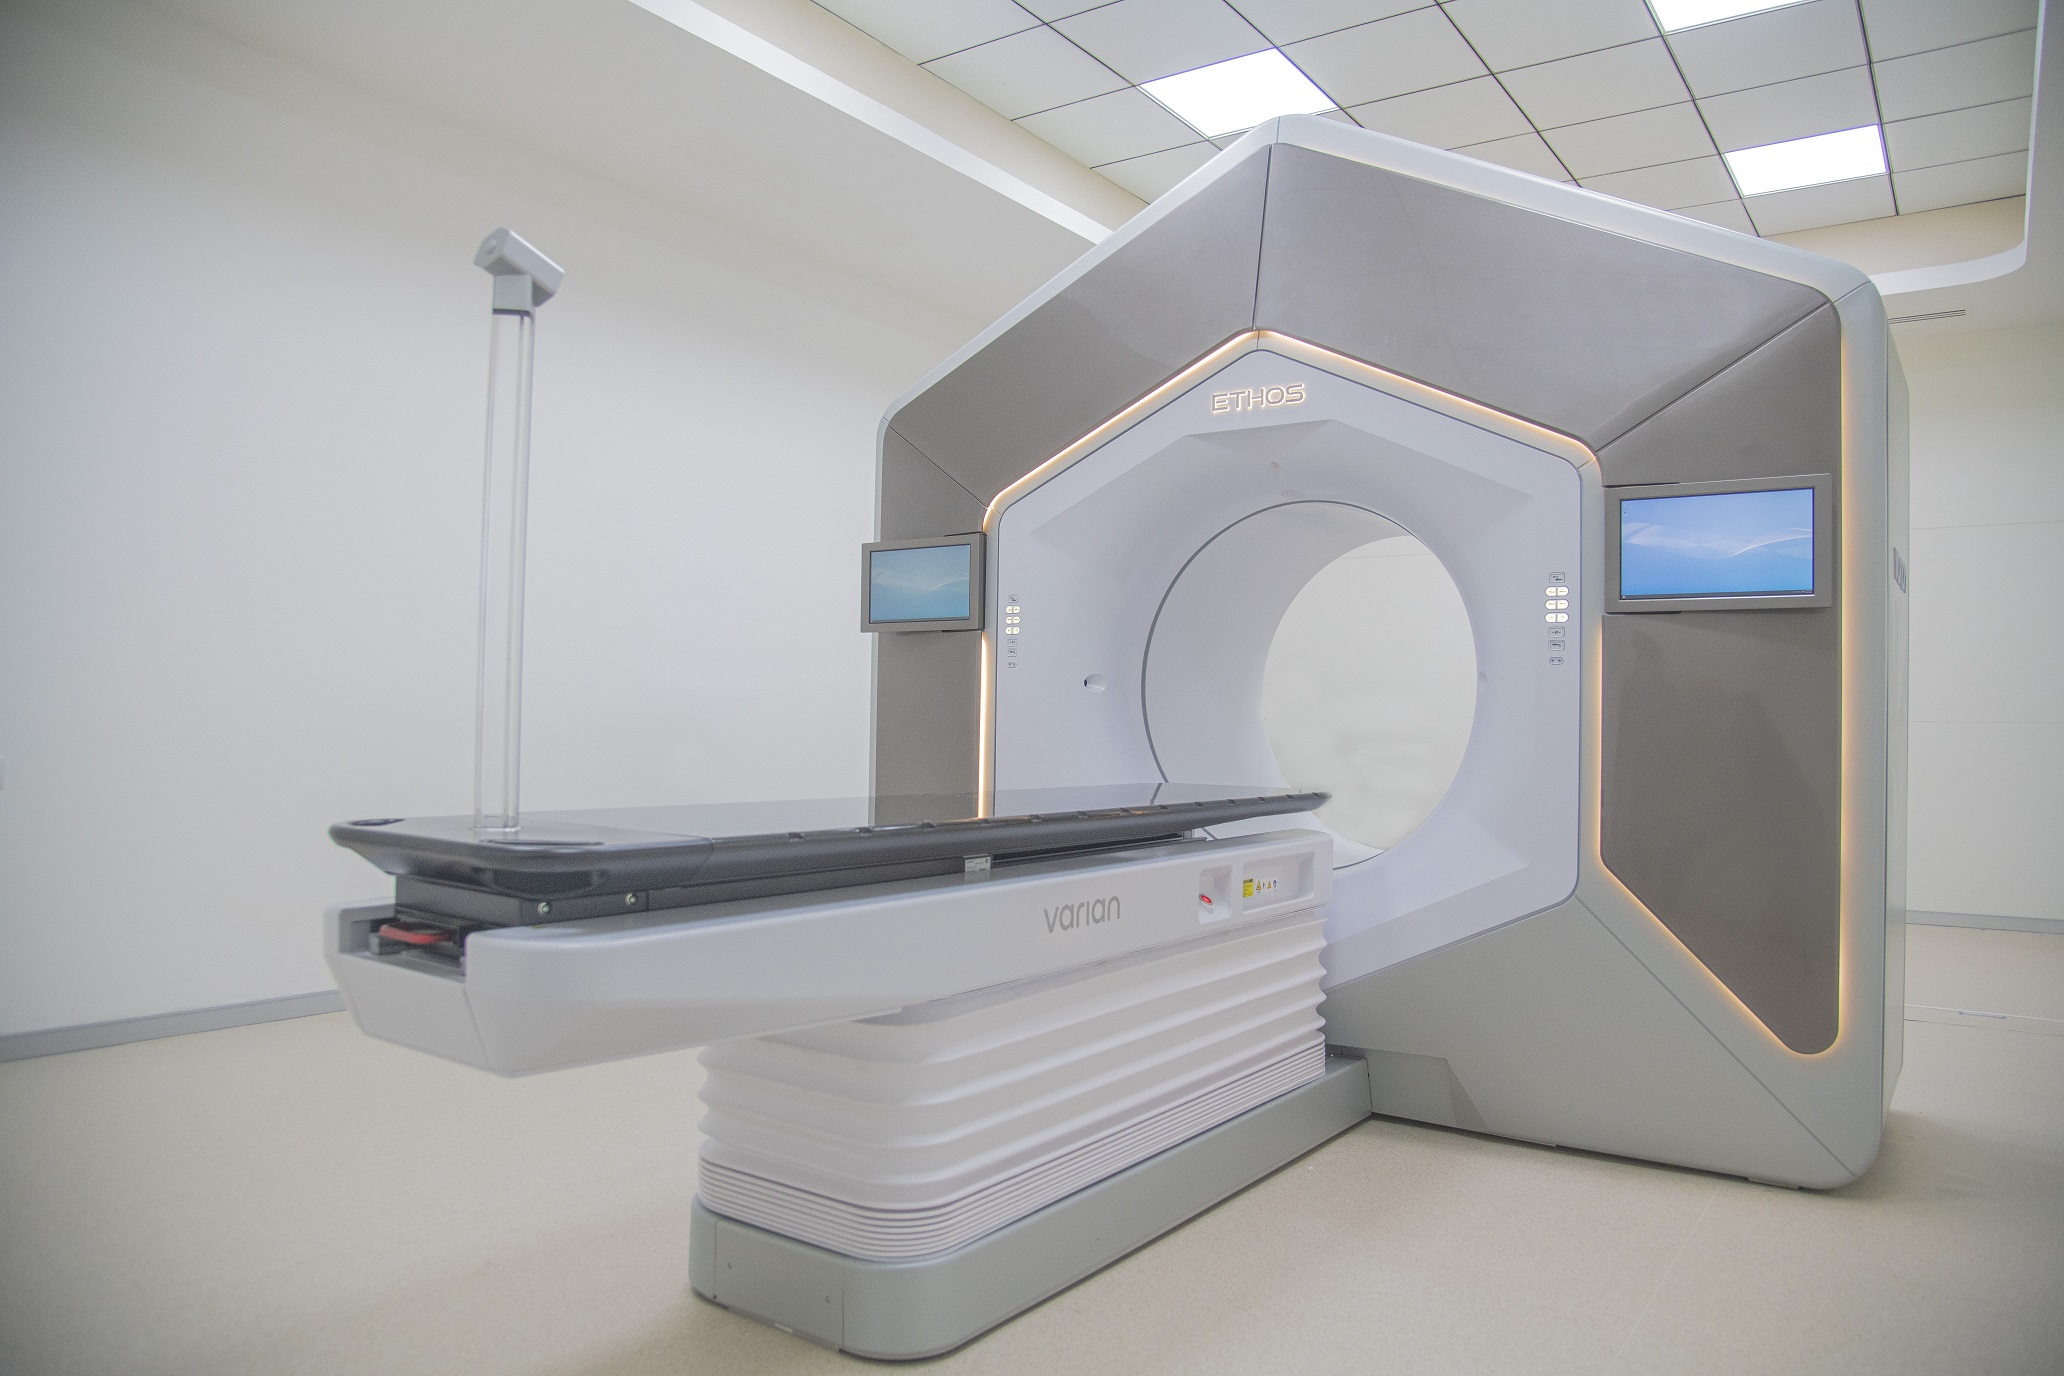 HCG Cancer Hospital Bengaluru sets a new benchmark for Personalized cancer care with a launch of an AI-based adaptive radiation treatment